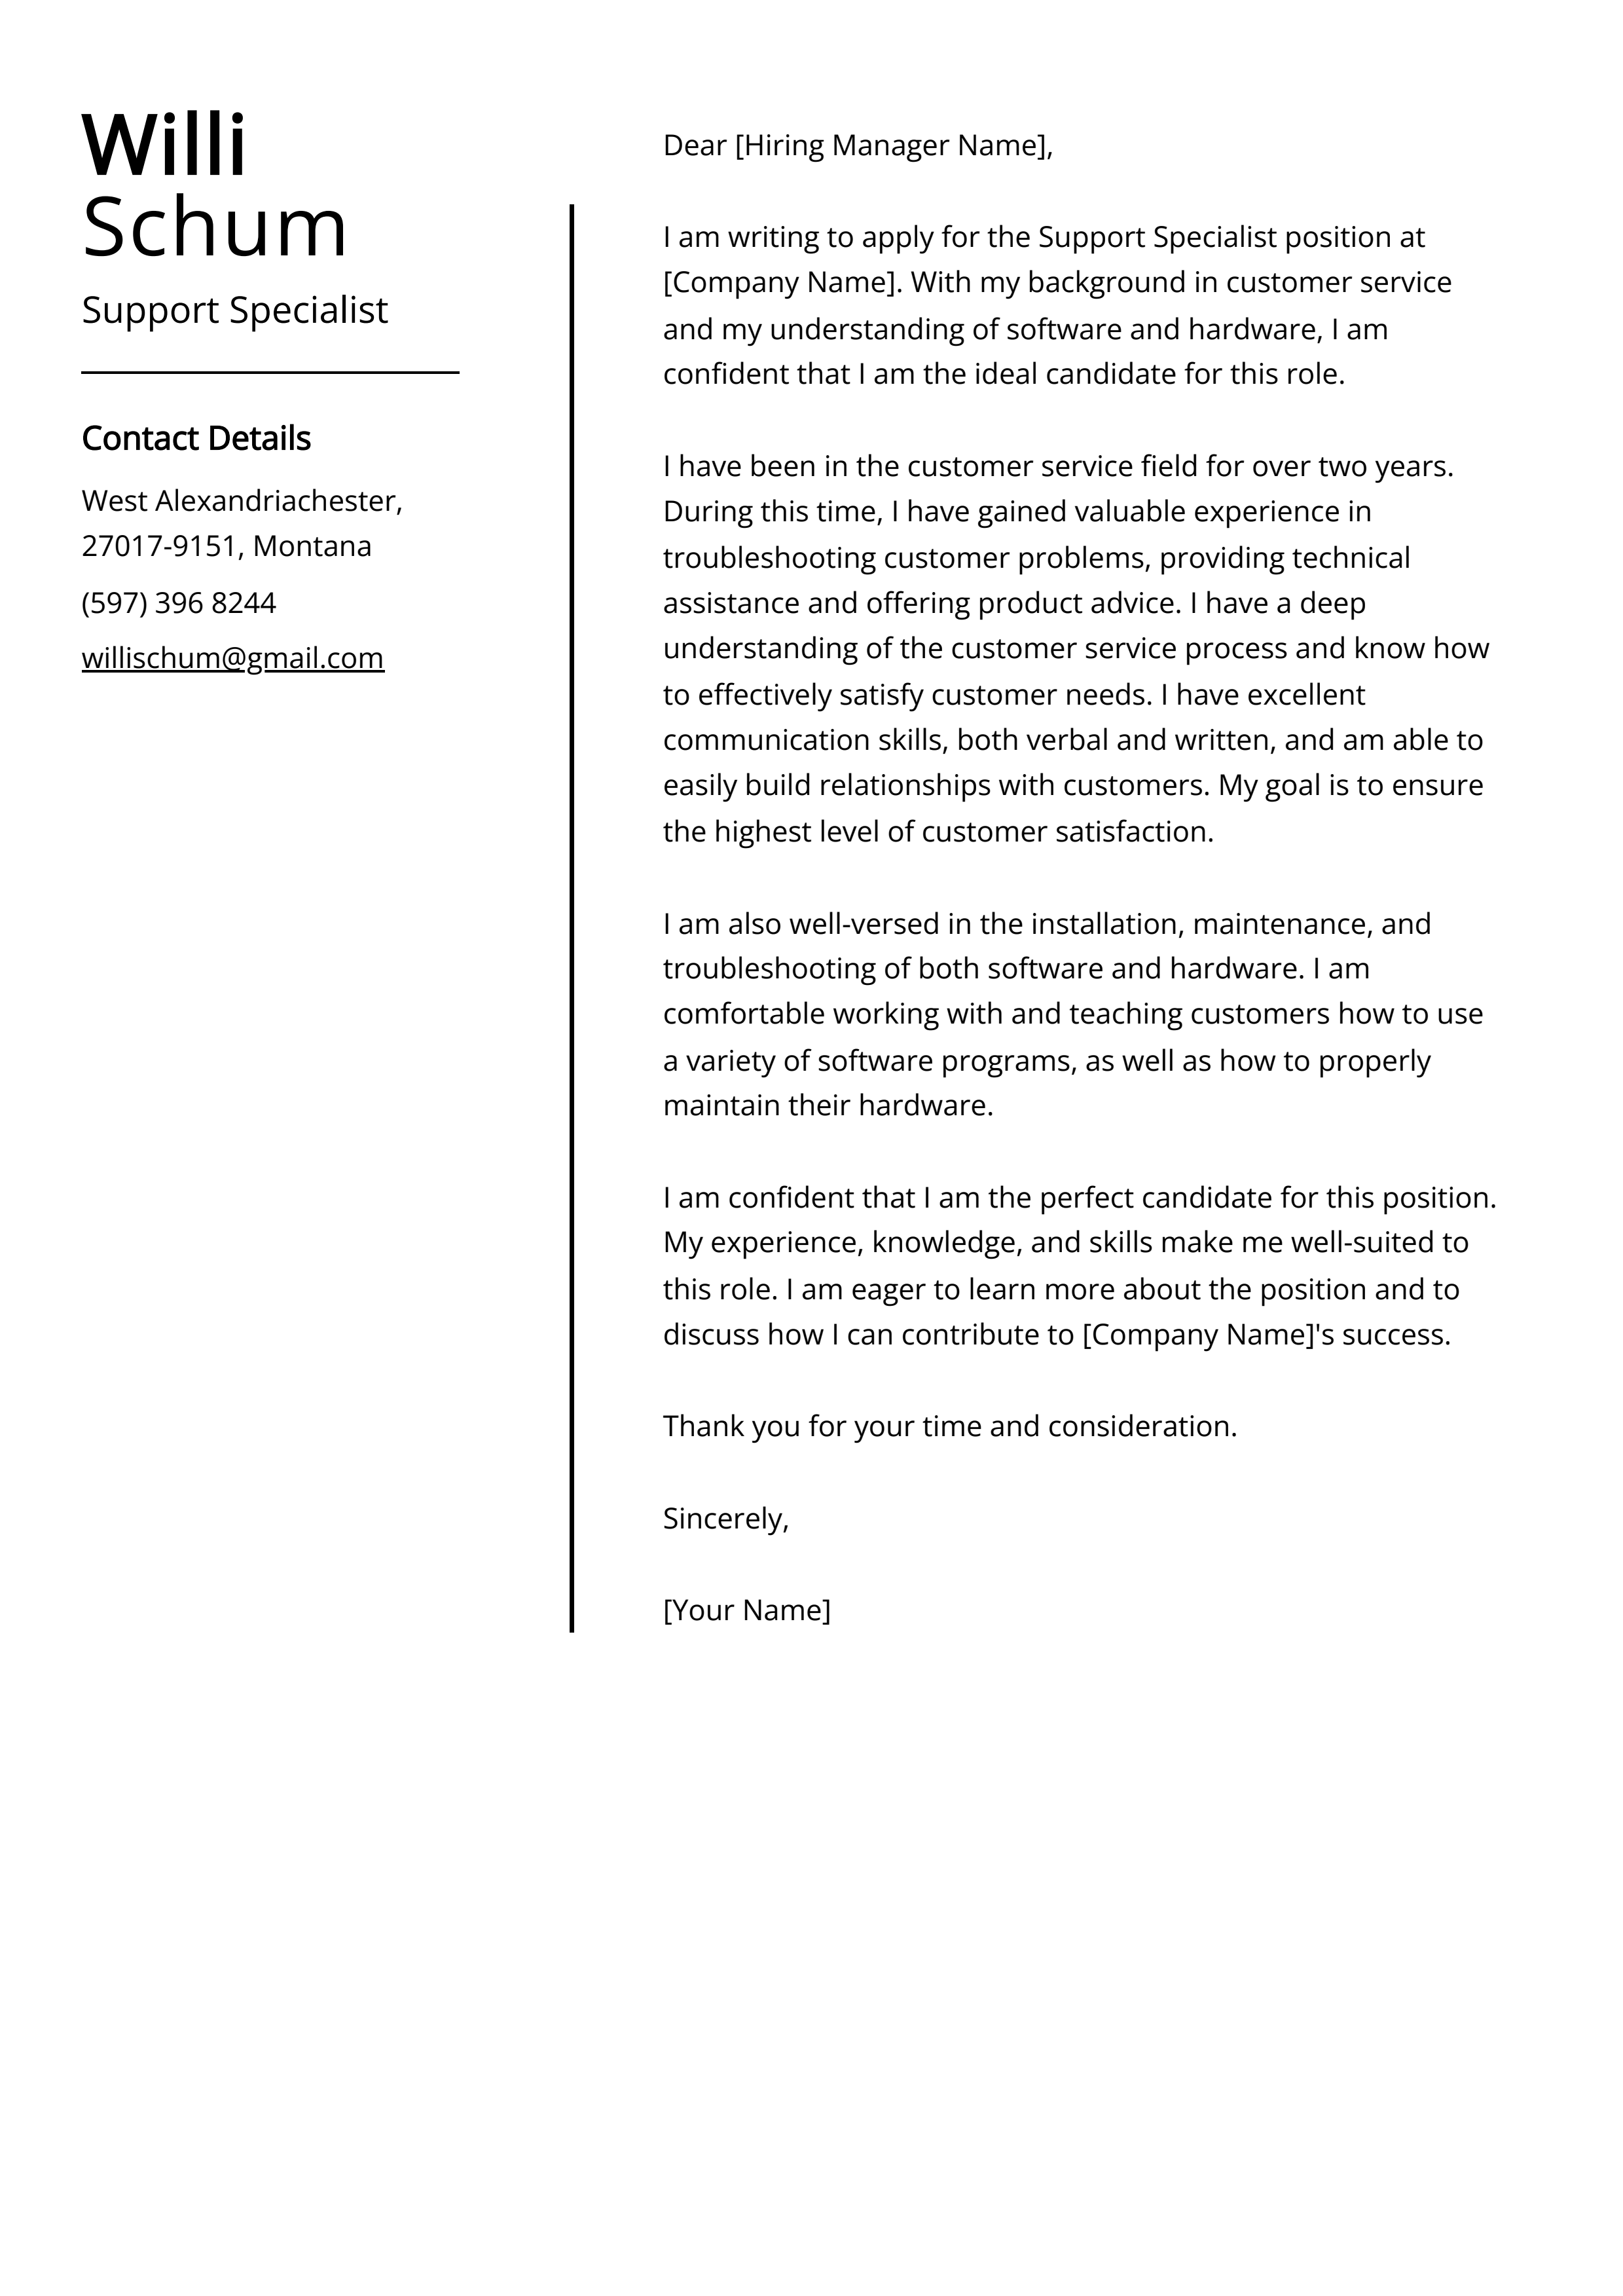 Support Specialist Cover Letter Example